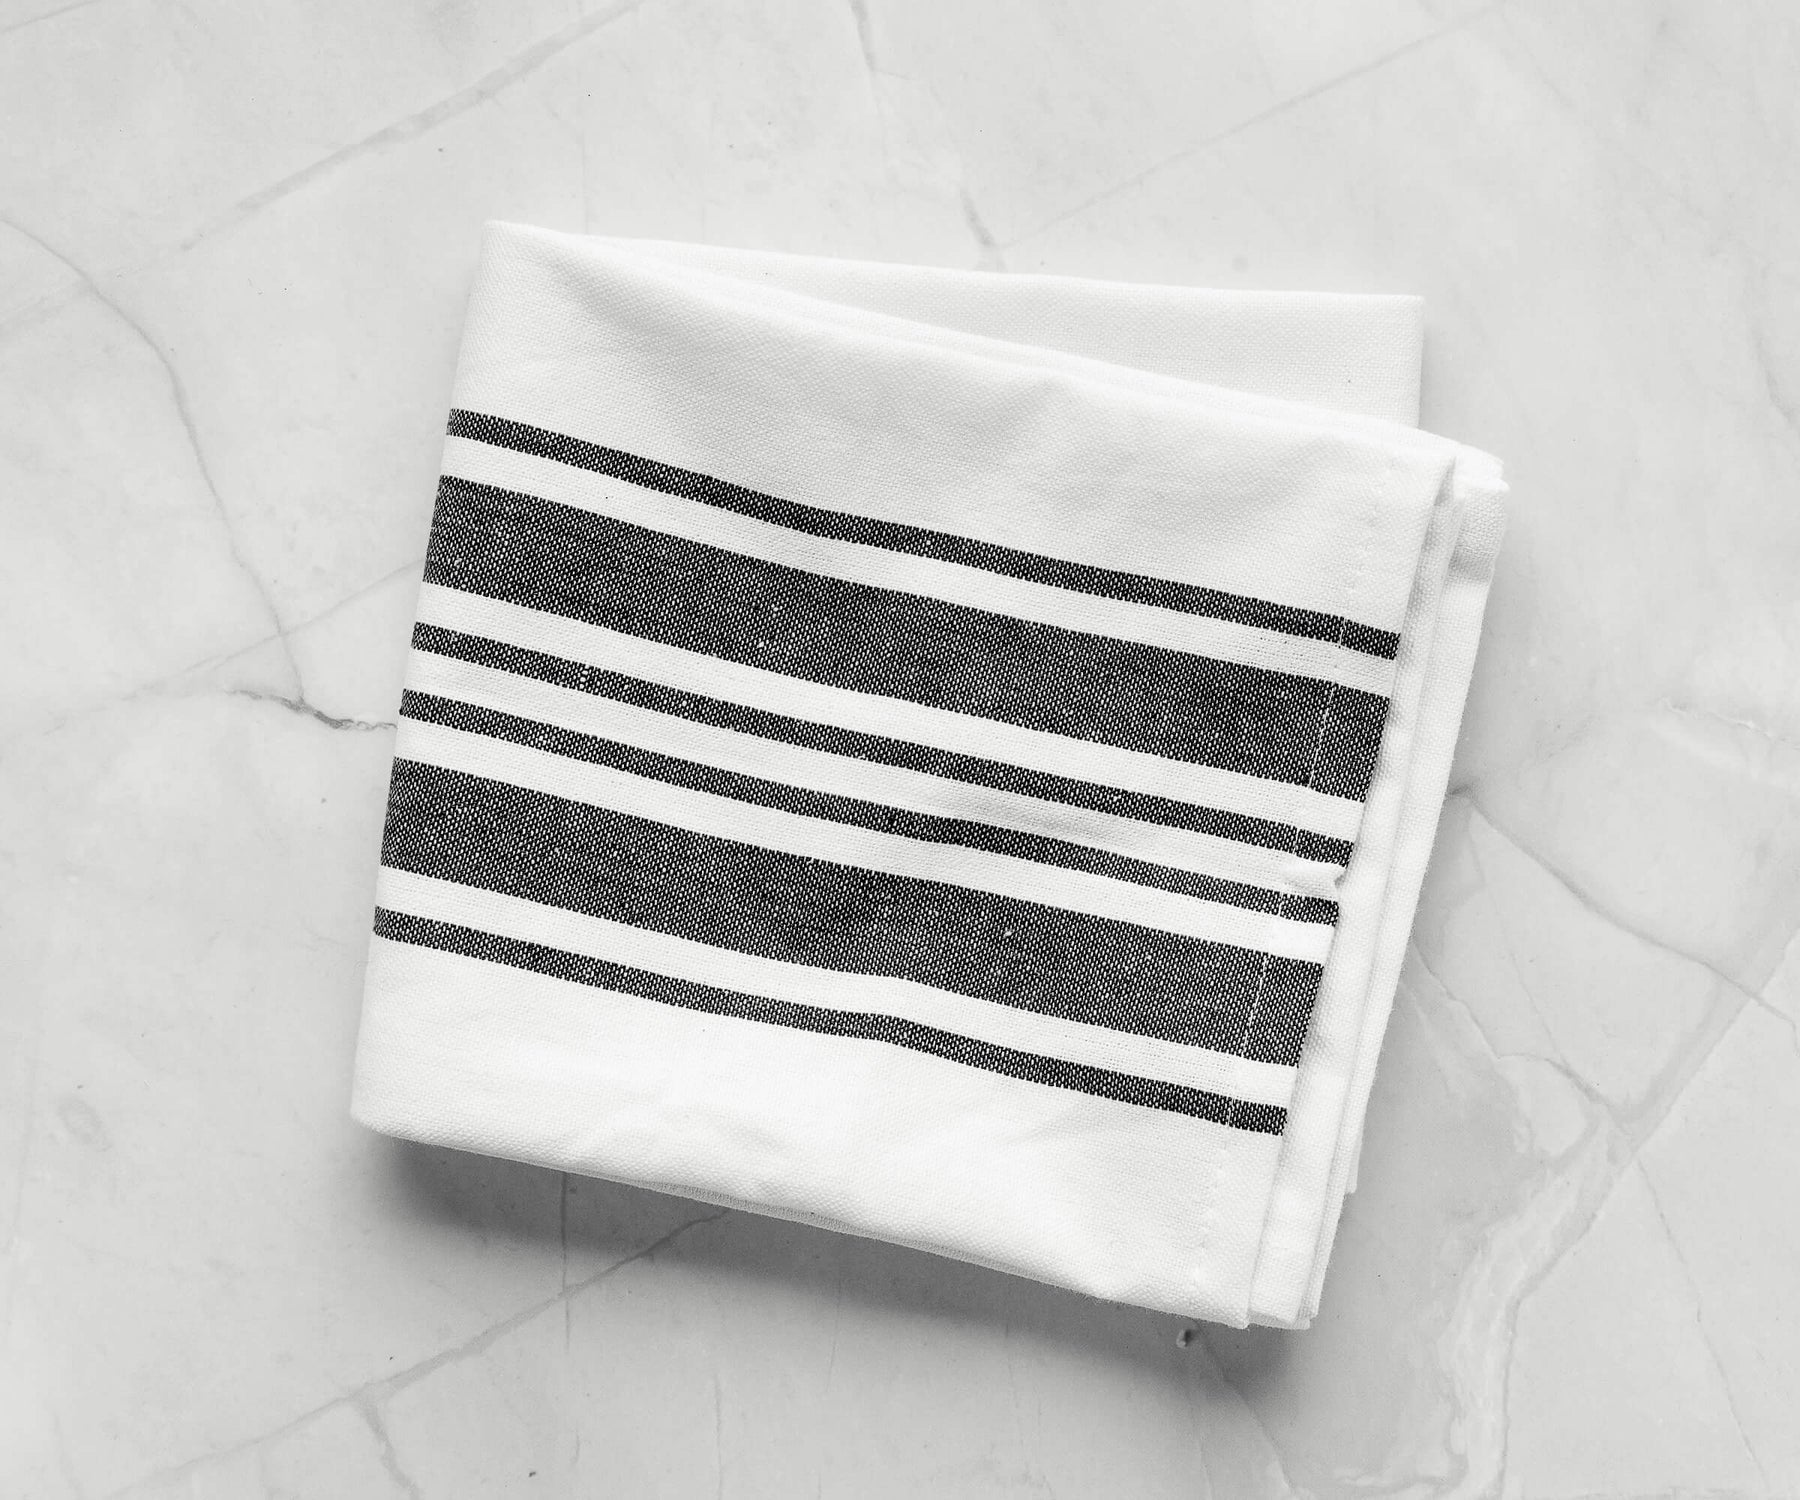 Black kitchen towel with white stripes on a marble countertop